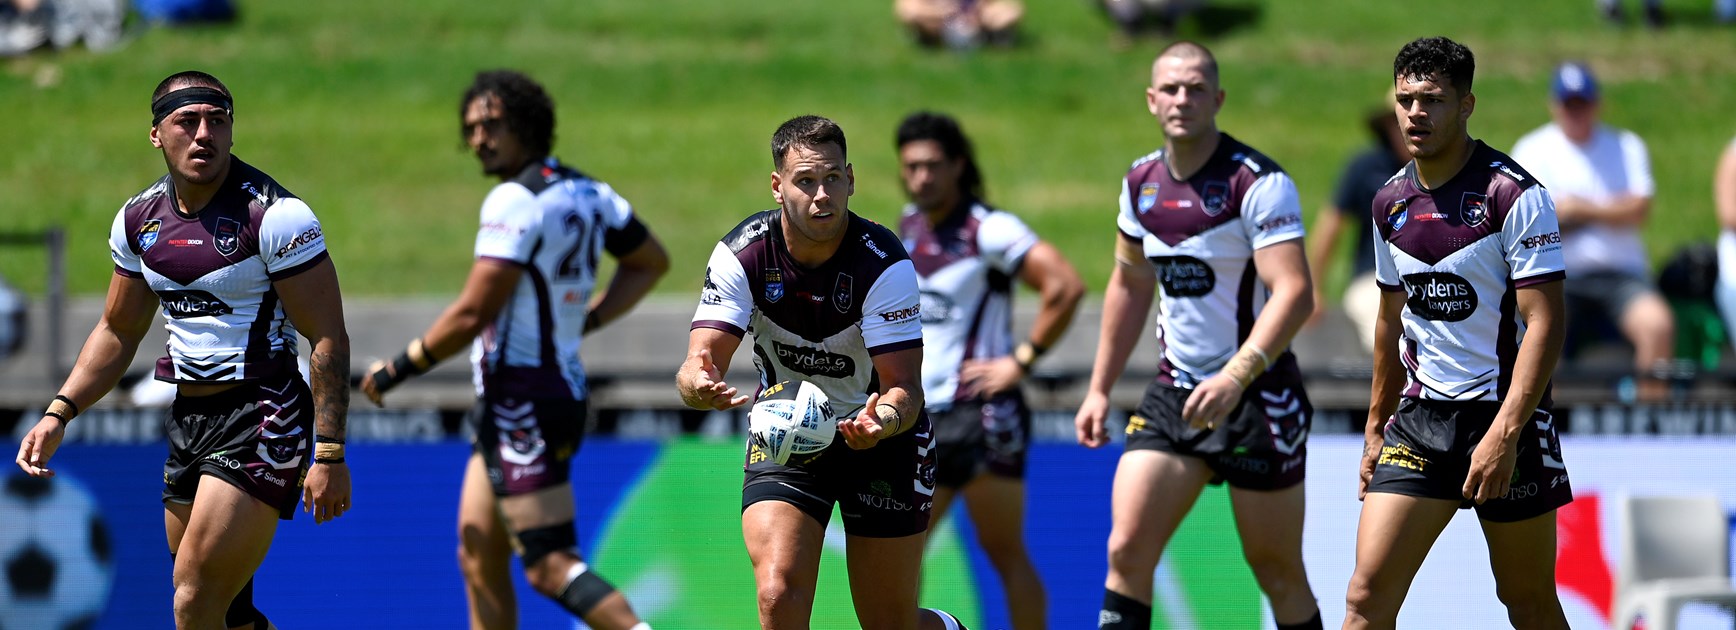 Blacktown Workers lose 26-12 to Souths in NSW Cup